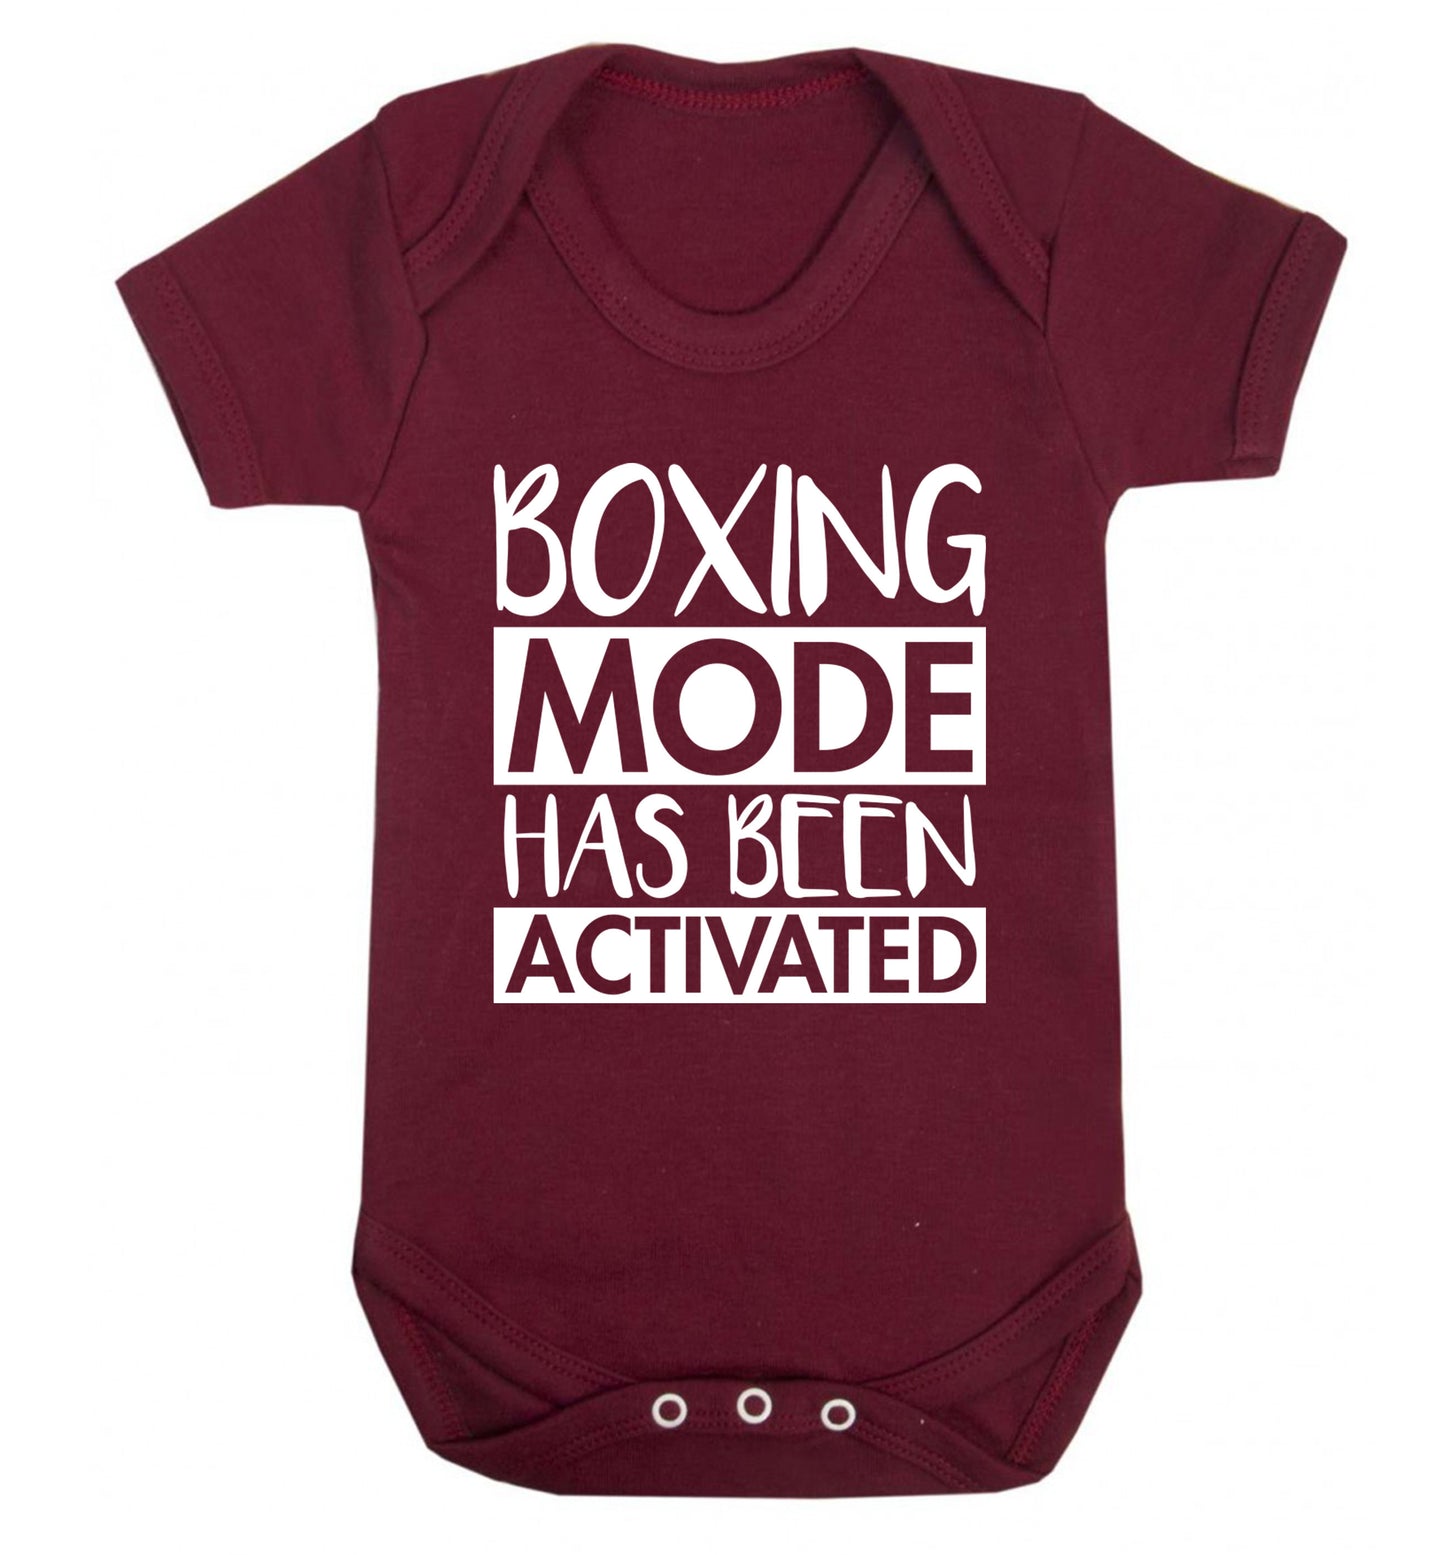 Boxing mode activated Baby Vest maroon 18-24 months